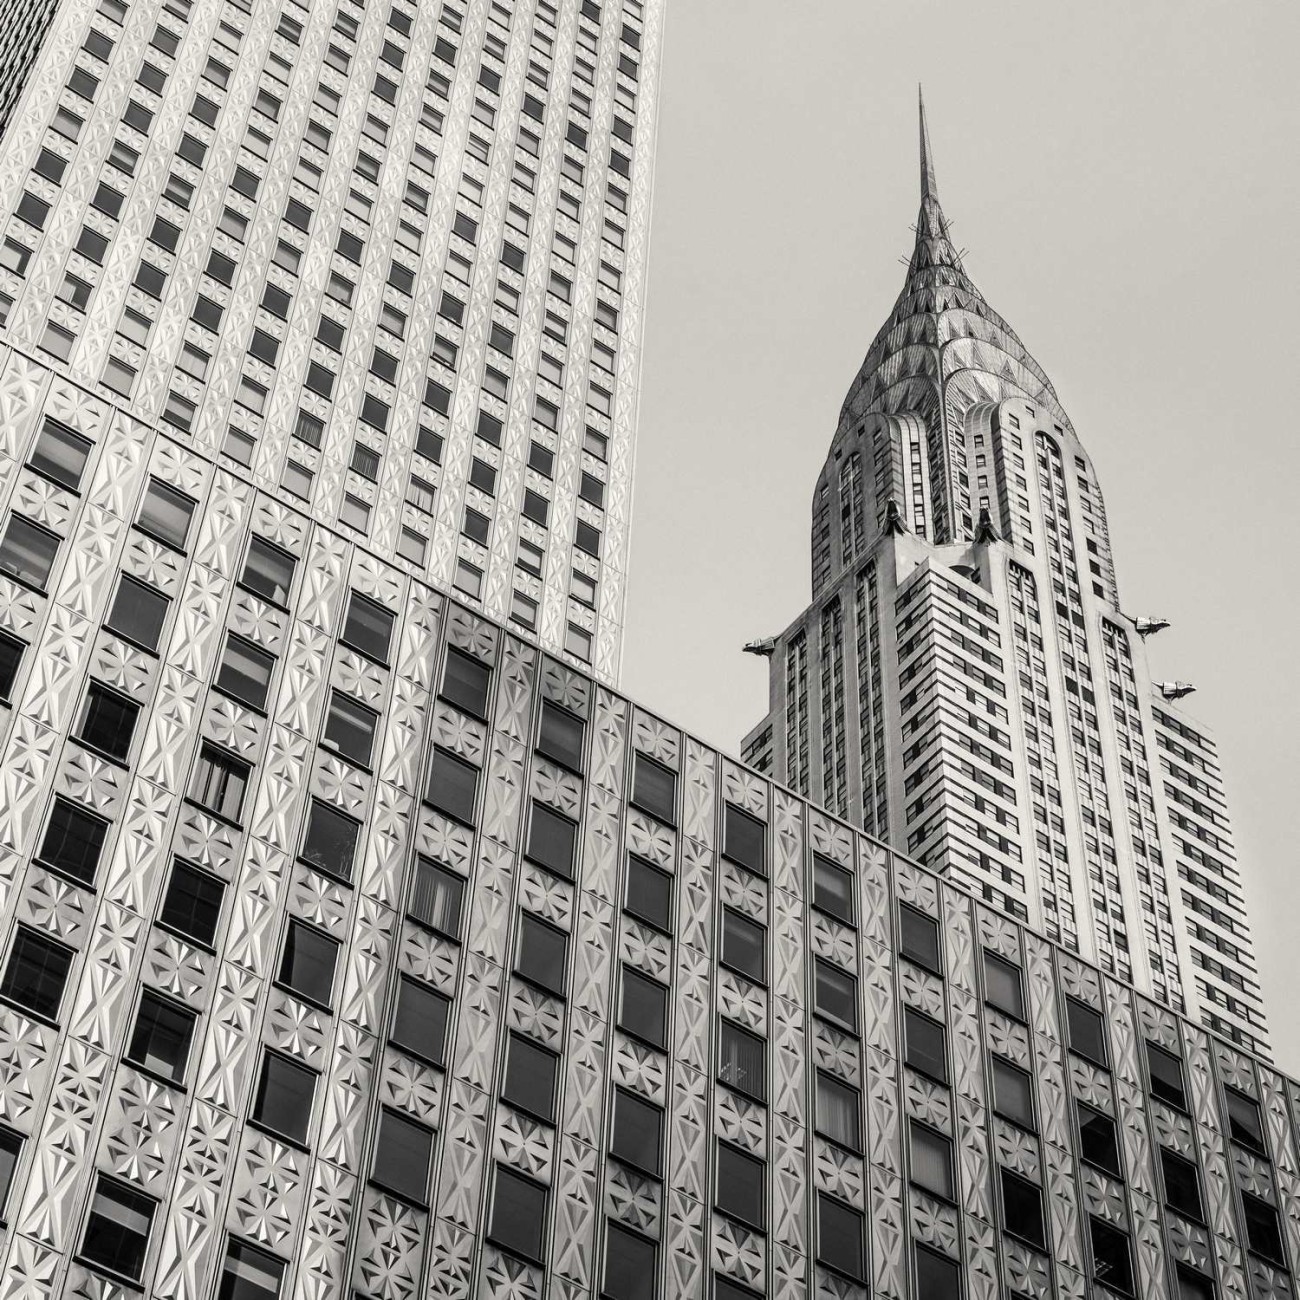 Mobil and Chrysler Buildings, NY, 2013